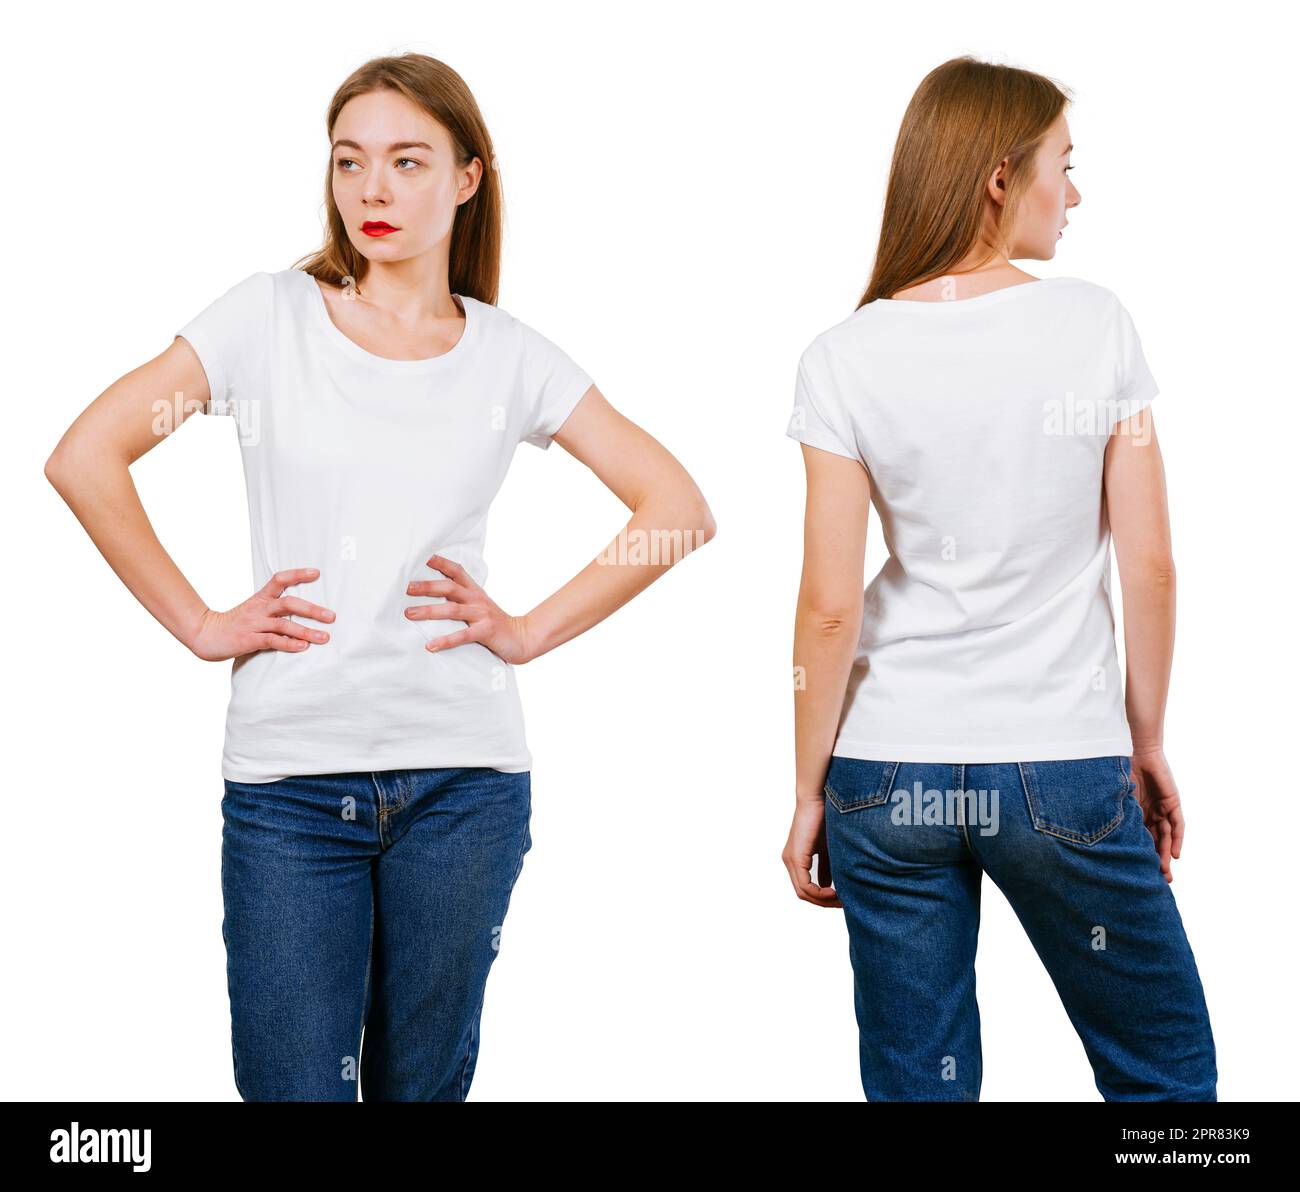 Sexy lady posing with blank white shirt and jeans Stock Photo